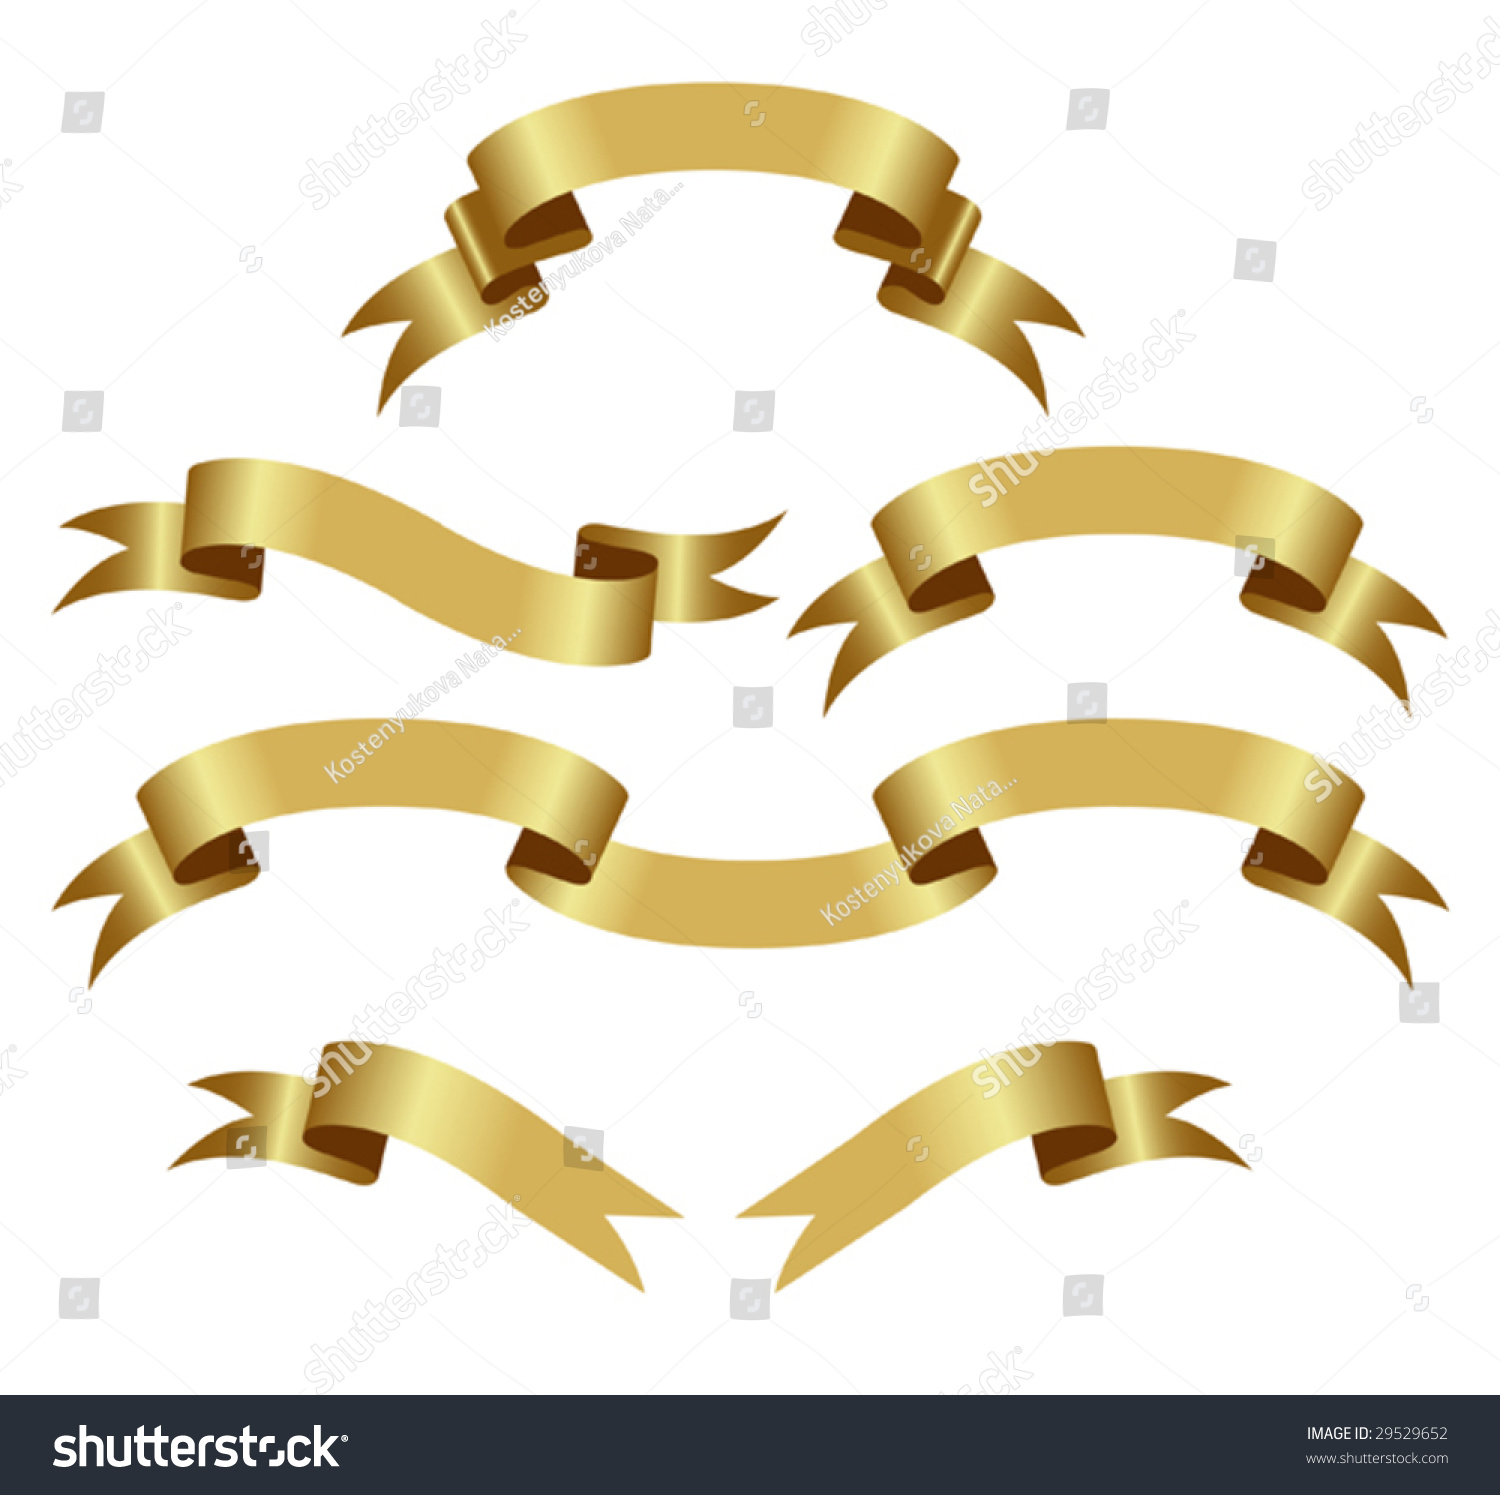 Gold Banners Isolated On A White Background. Vector Illustration